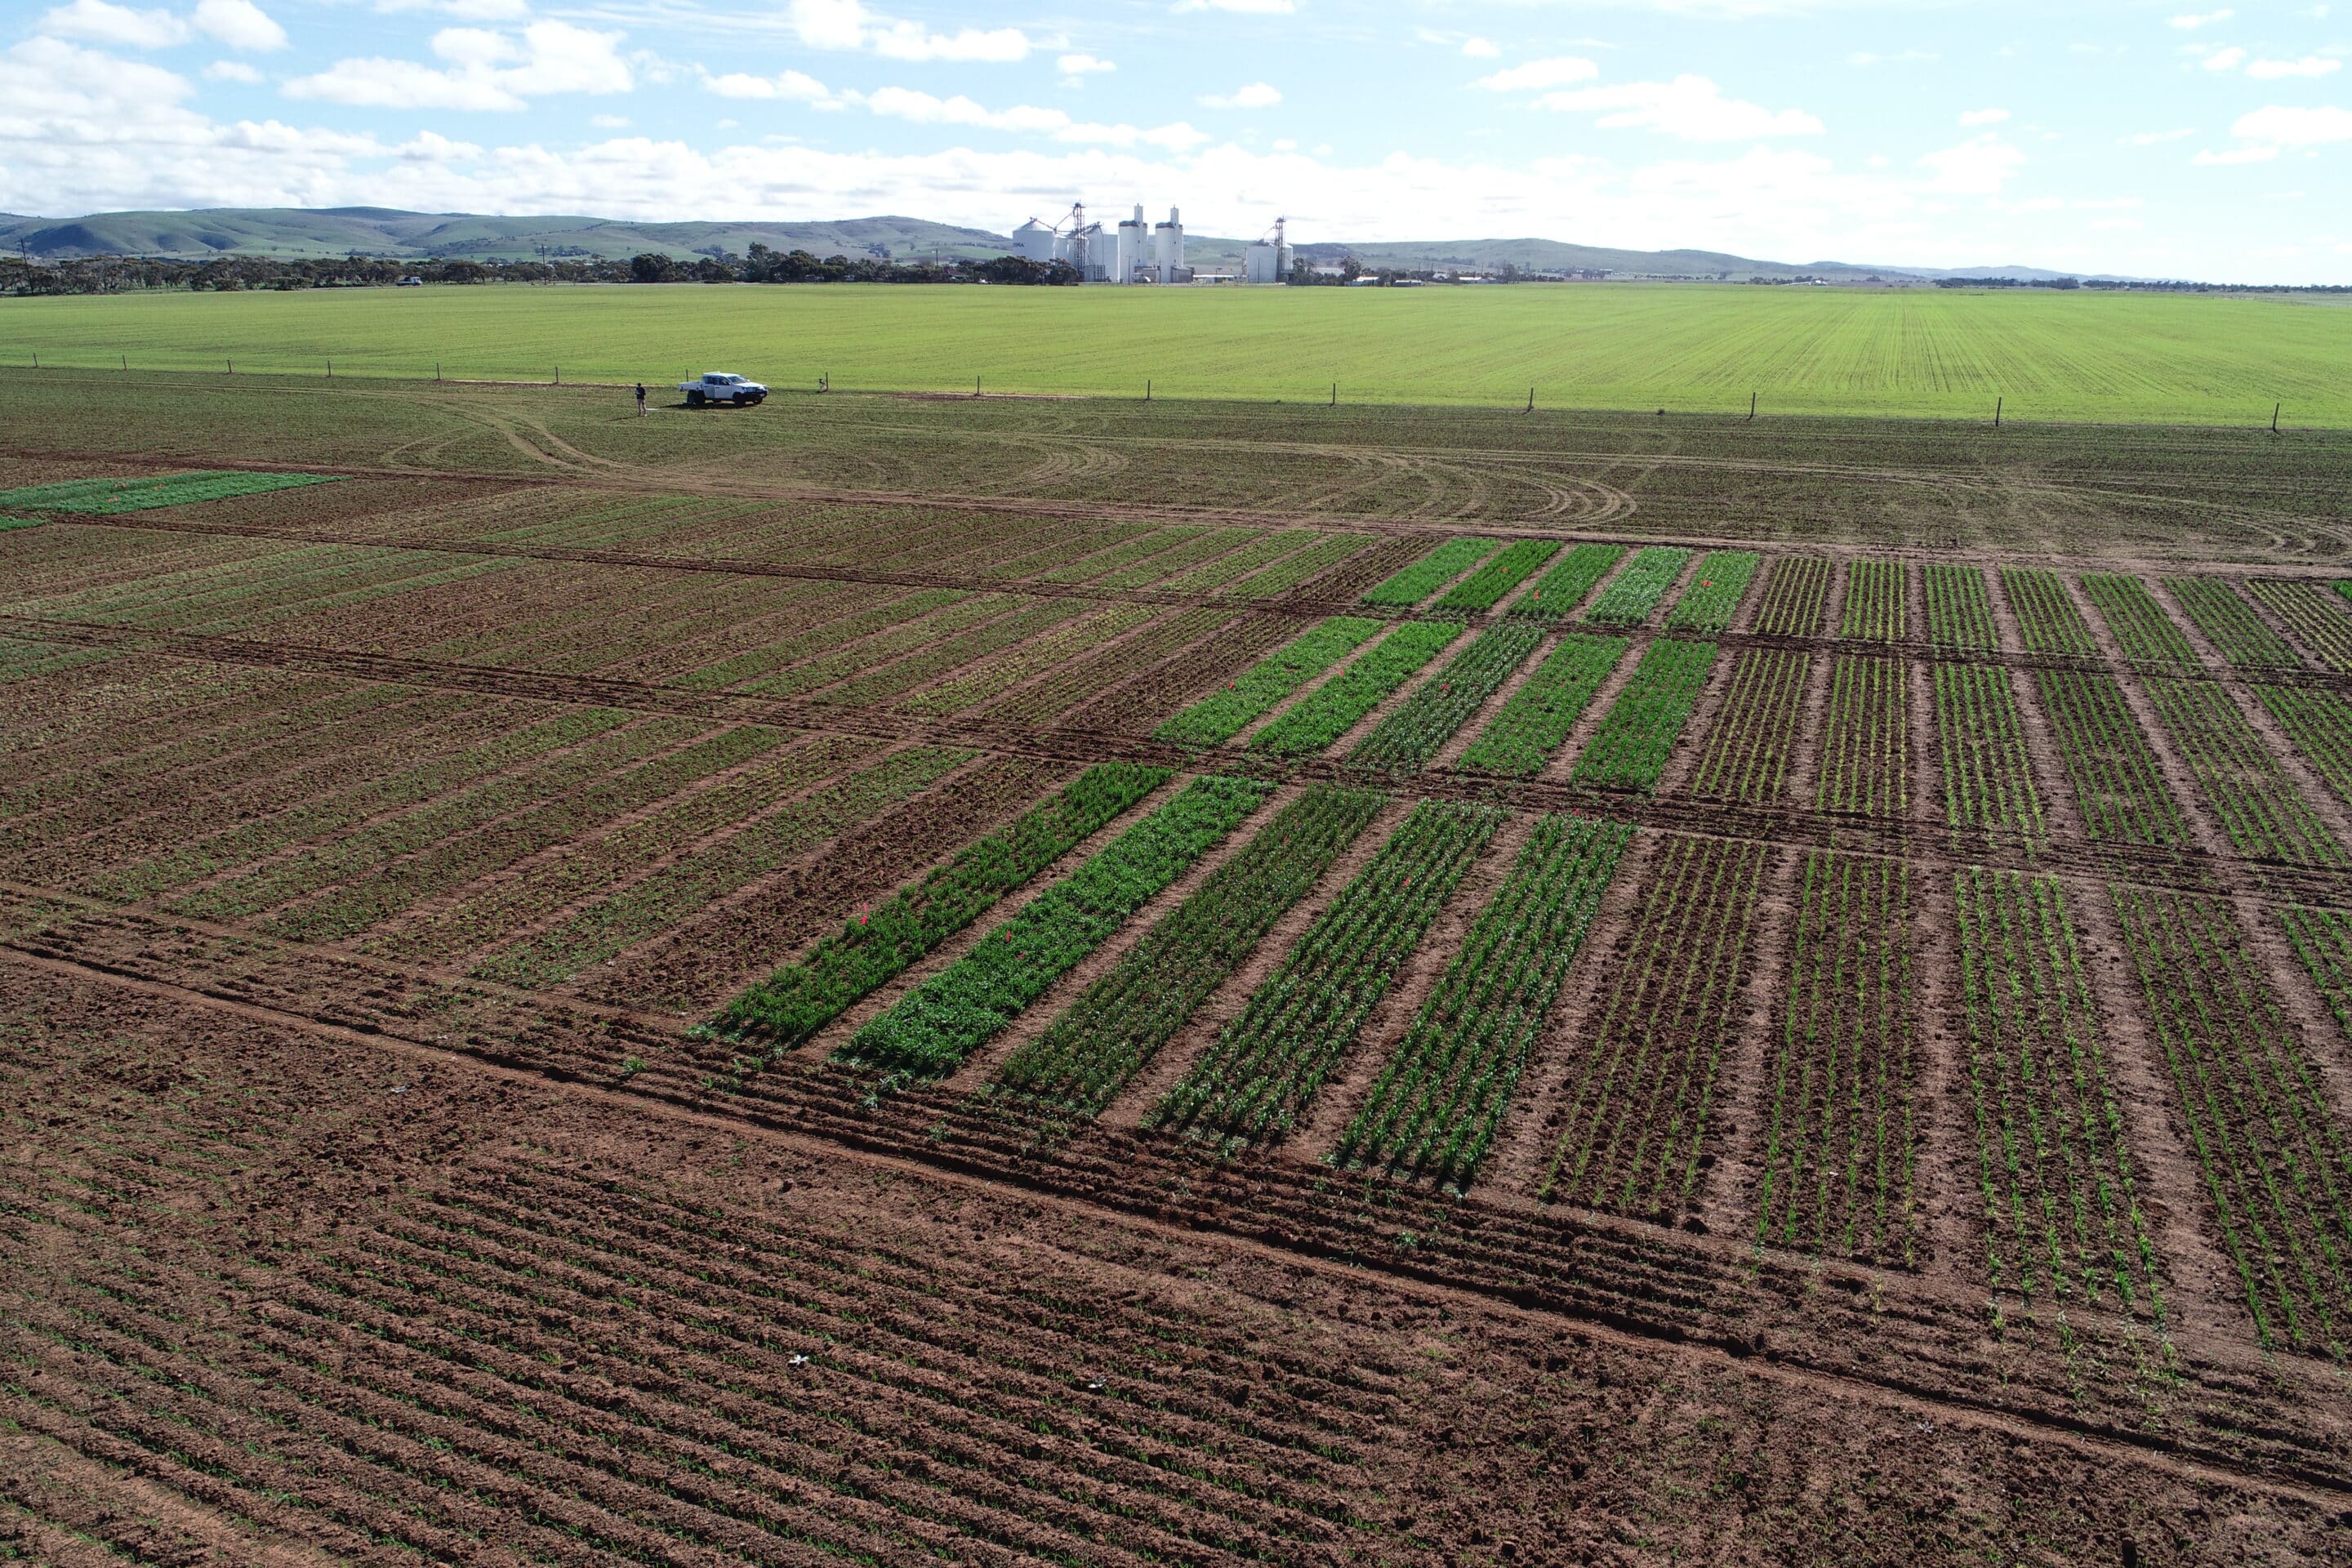 Characterising the optimal flowering period for the Murray Plains (S/UA1021)